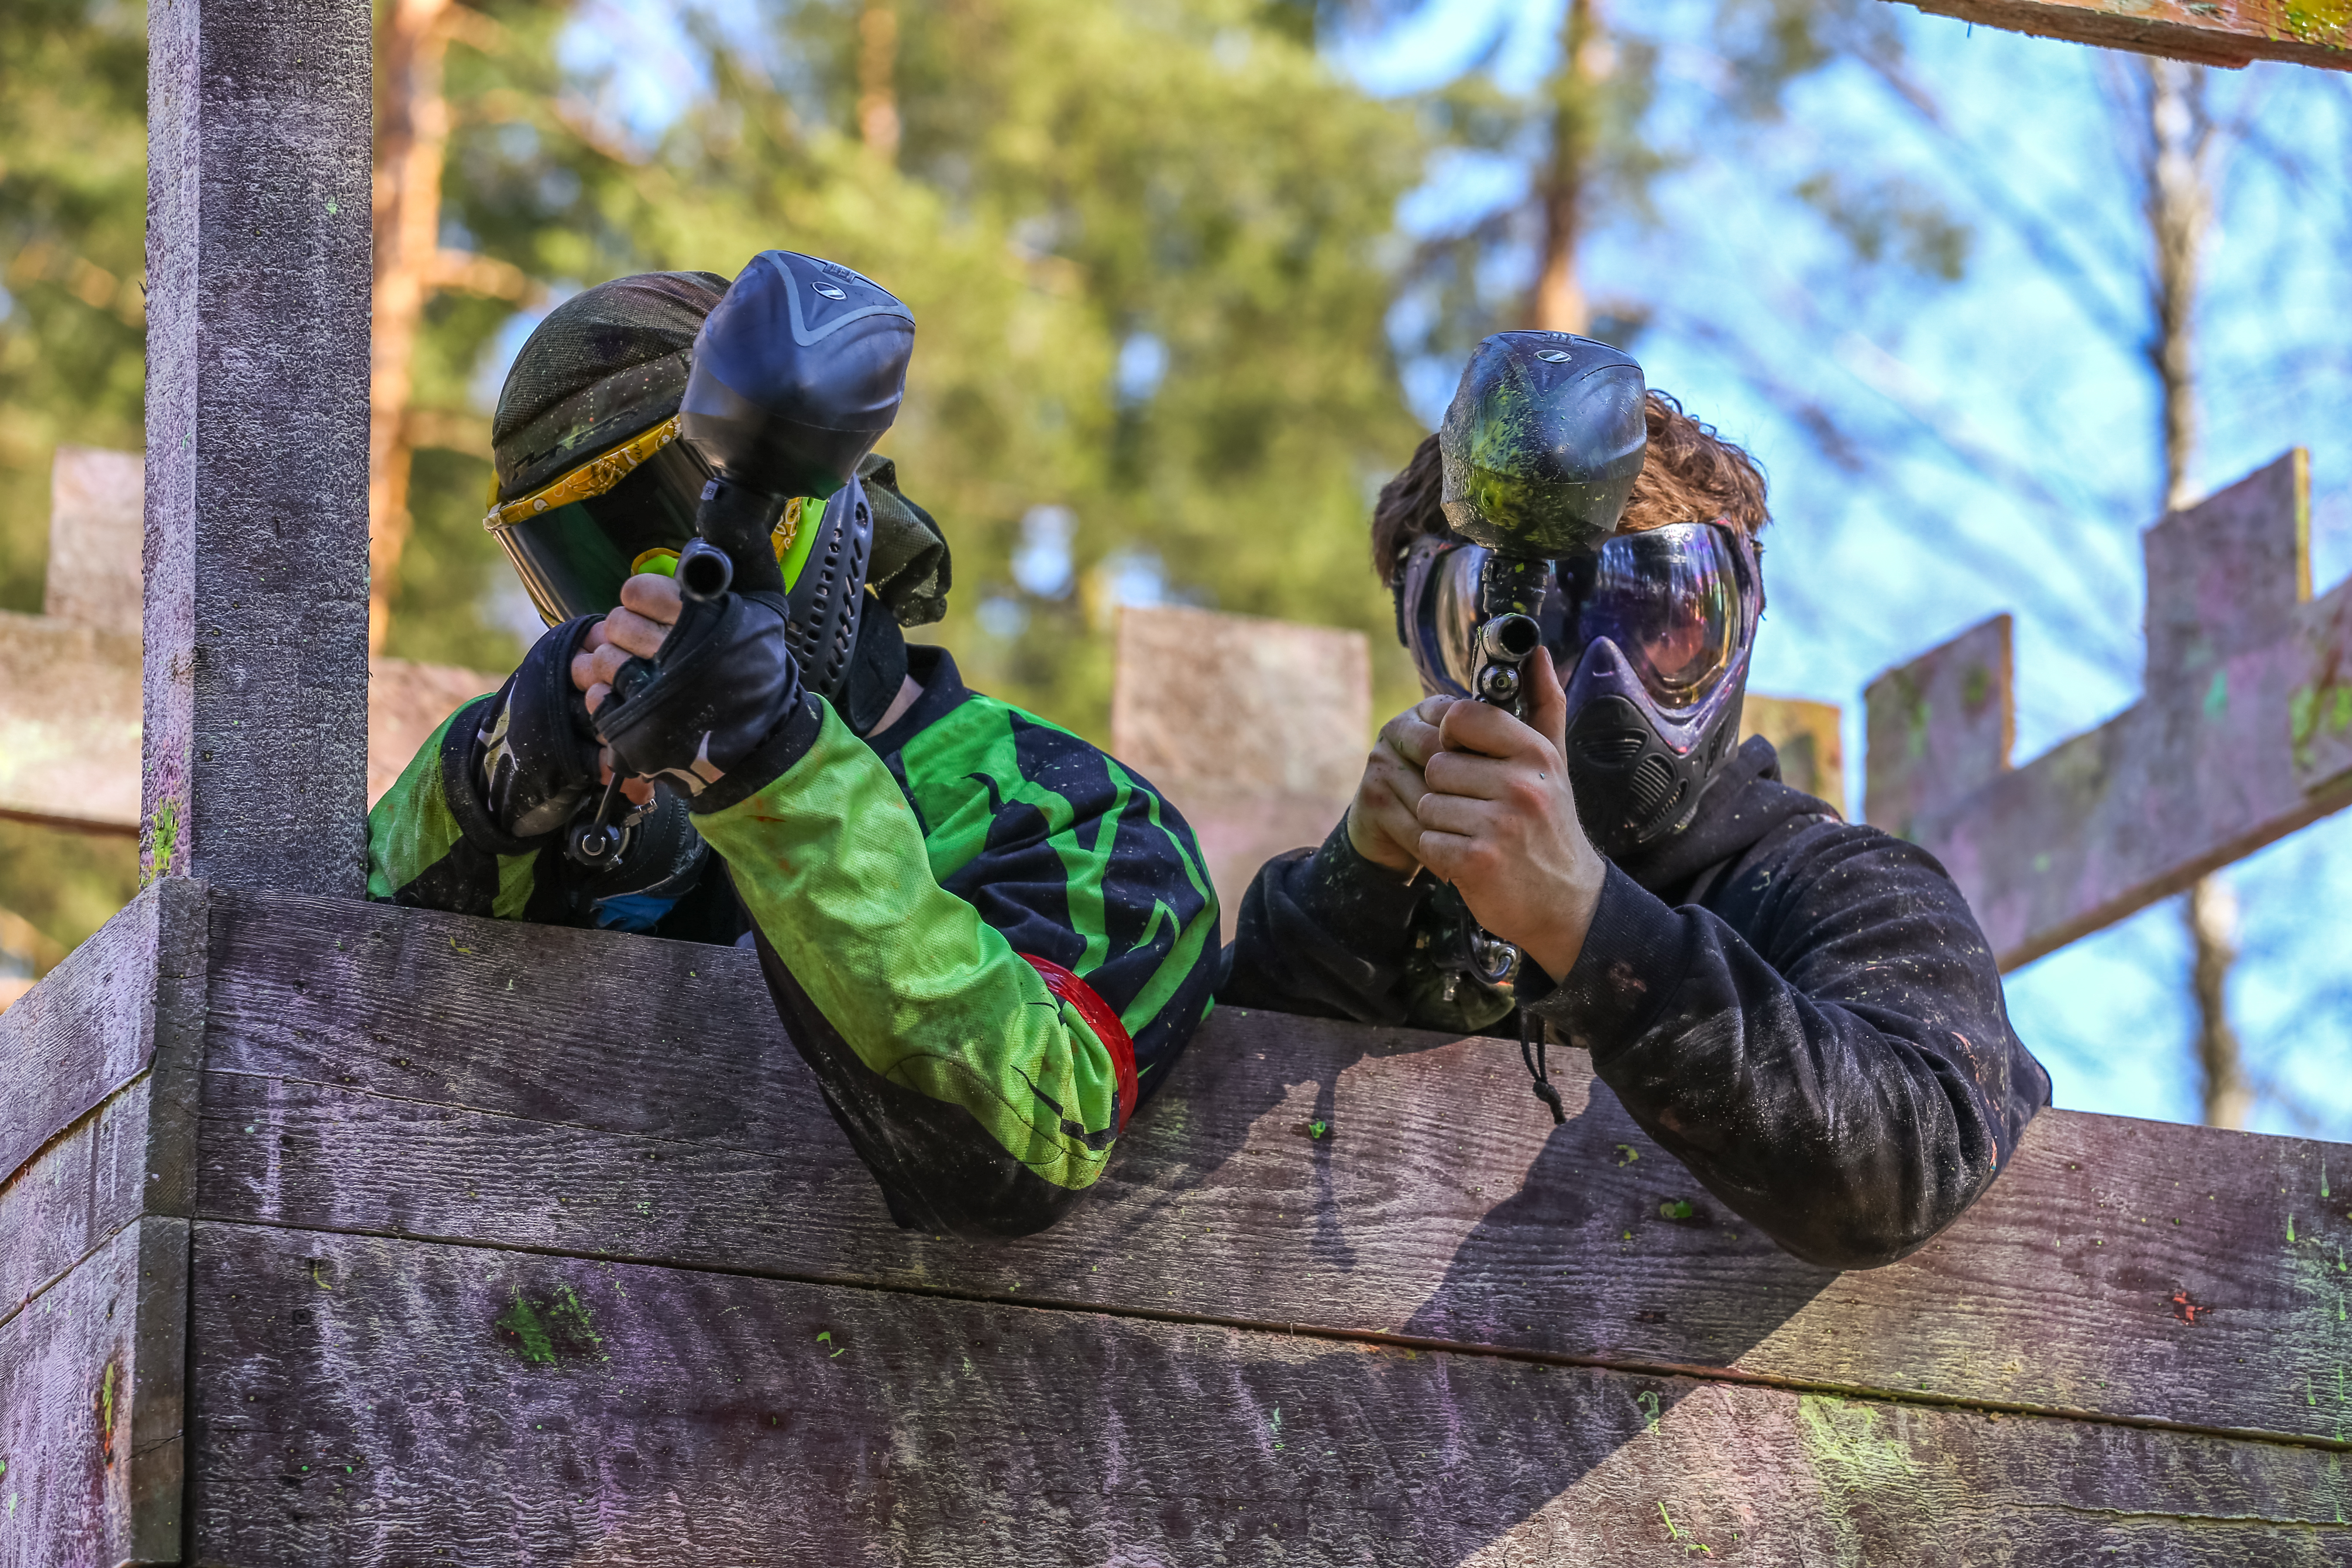 The Different Styles Of Paintball Play